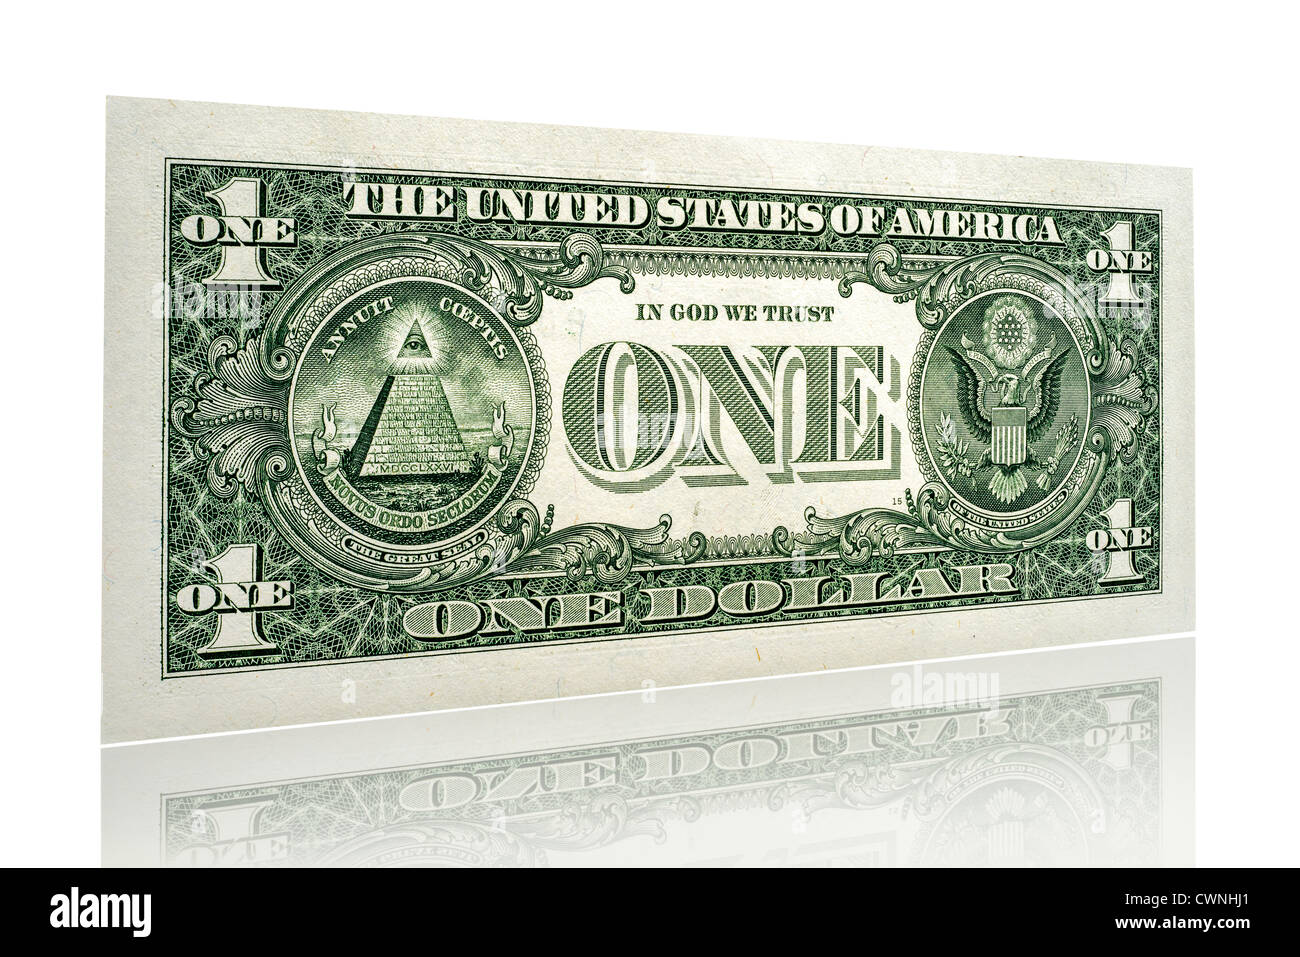 One-dollar bill, single one dollar banknote, back side, isolated on 100% white background Stock Photo